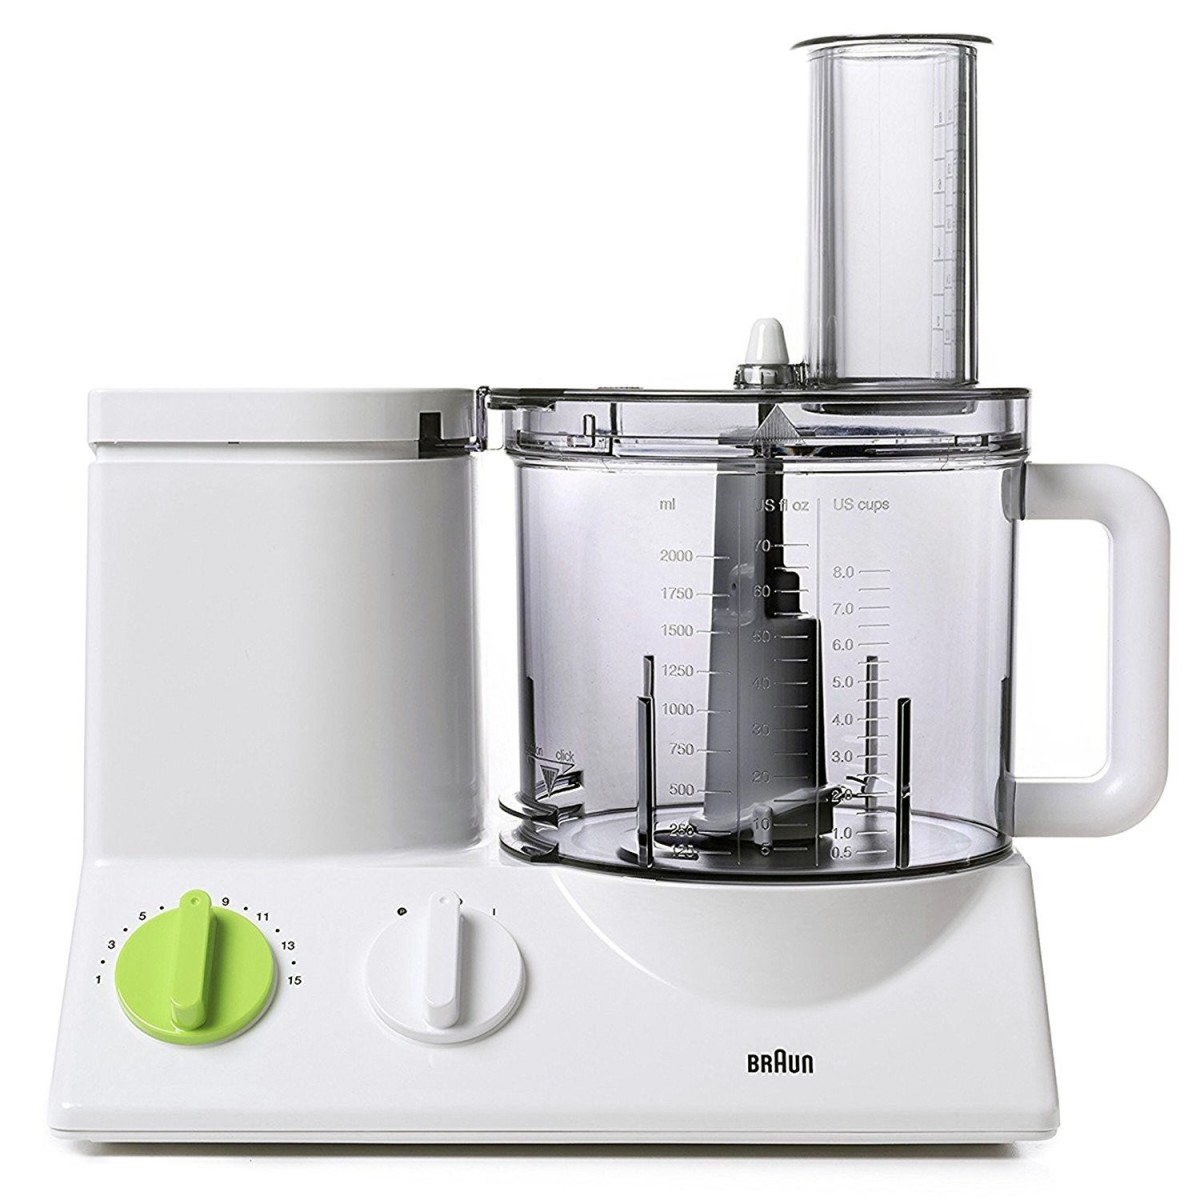 braun tributecollection food processor review